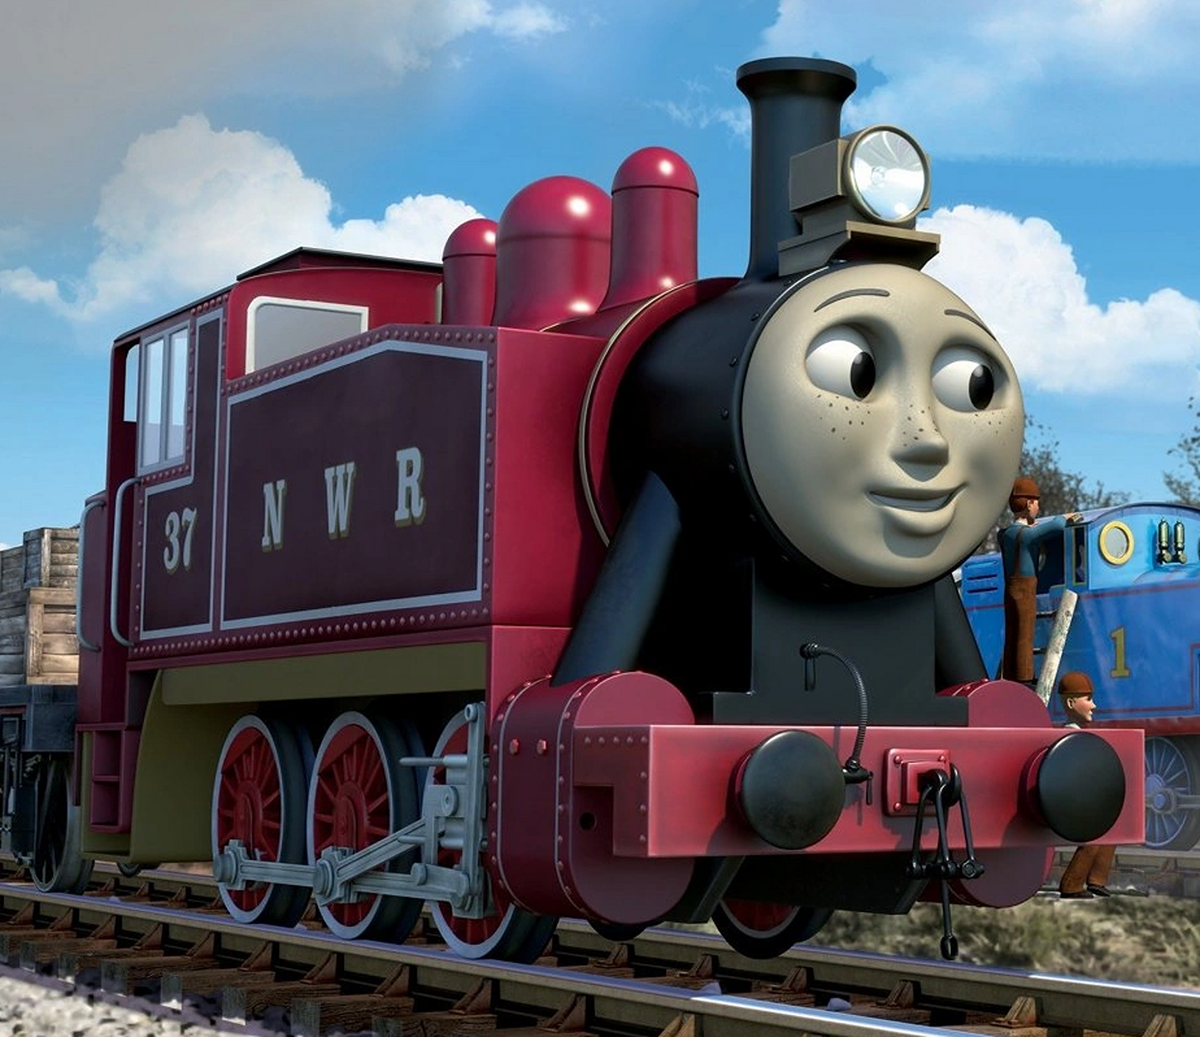 Rosie the pink Thomas the train on a wooden railroad Stock Photo